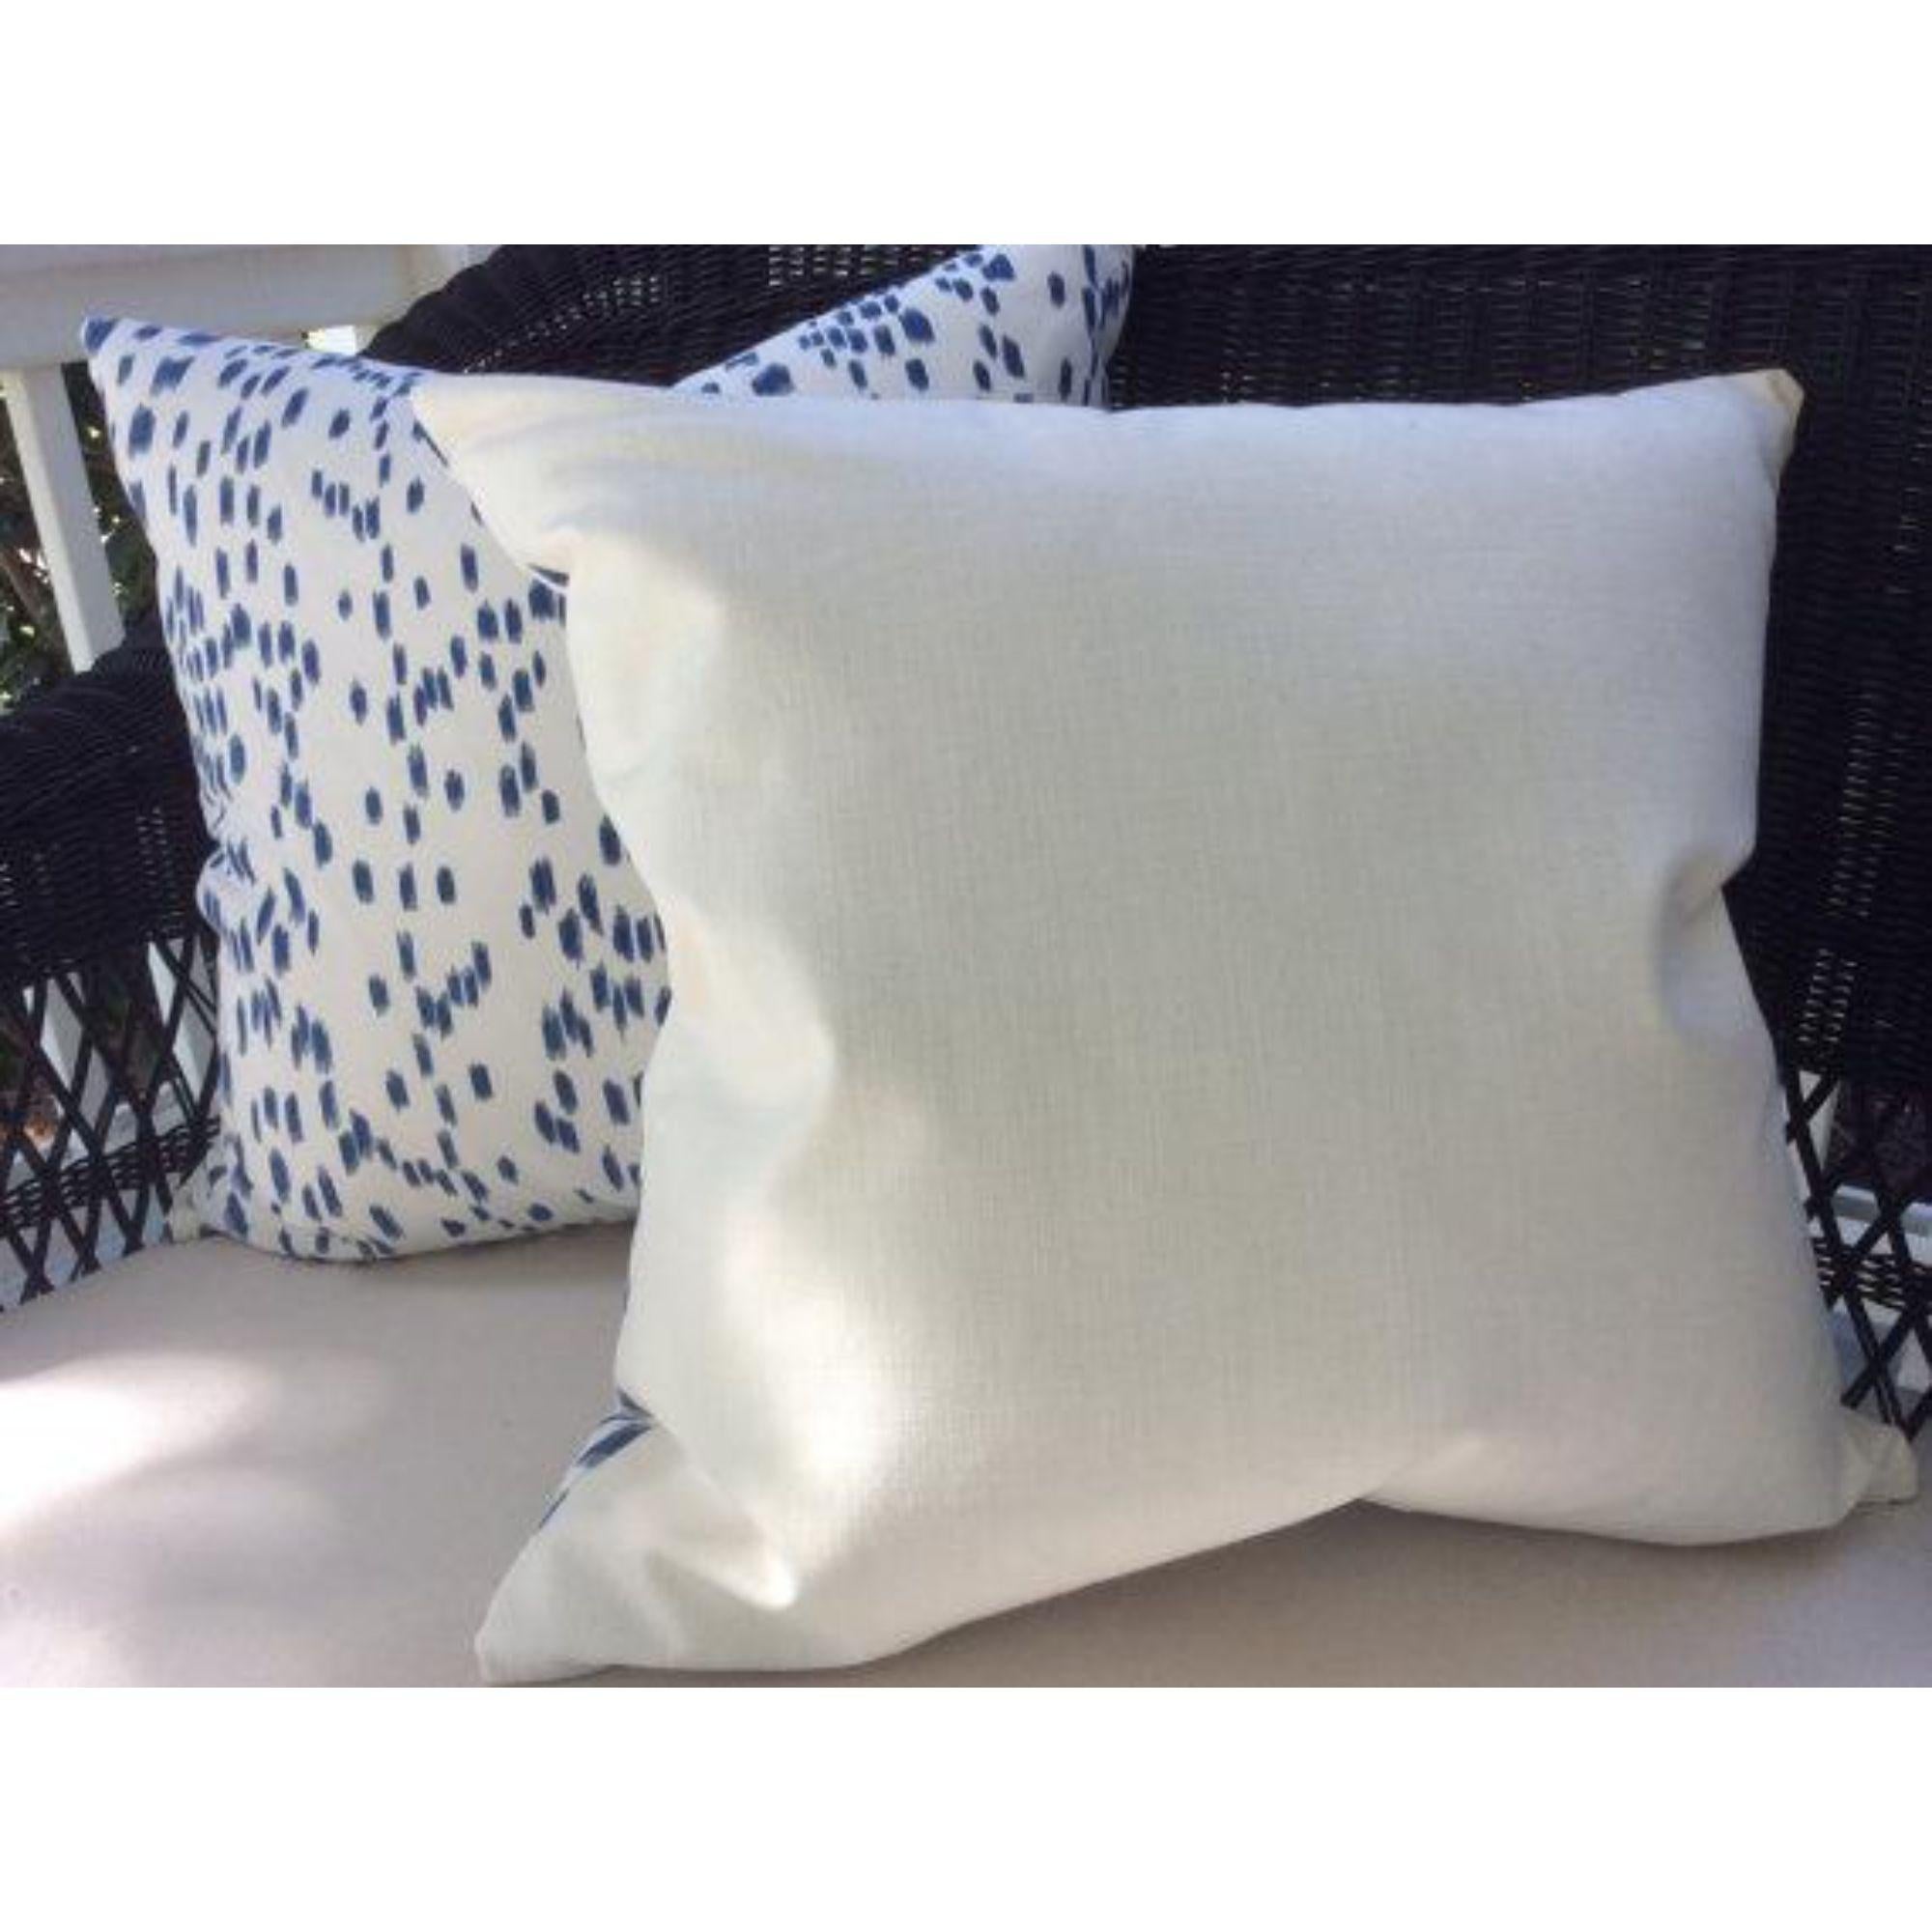 Brunschwig & Fils Pillow Covers - a Pair In New Condition For Sale In Winder, GA